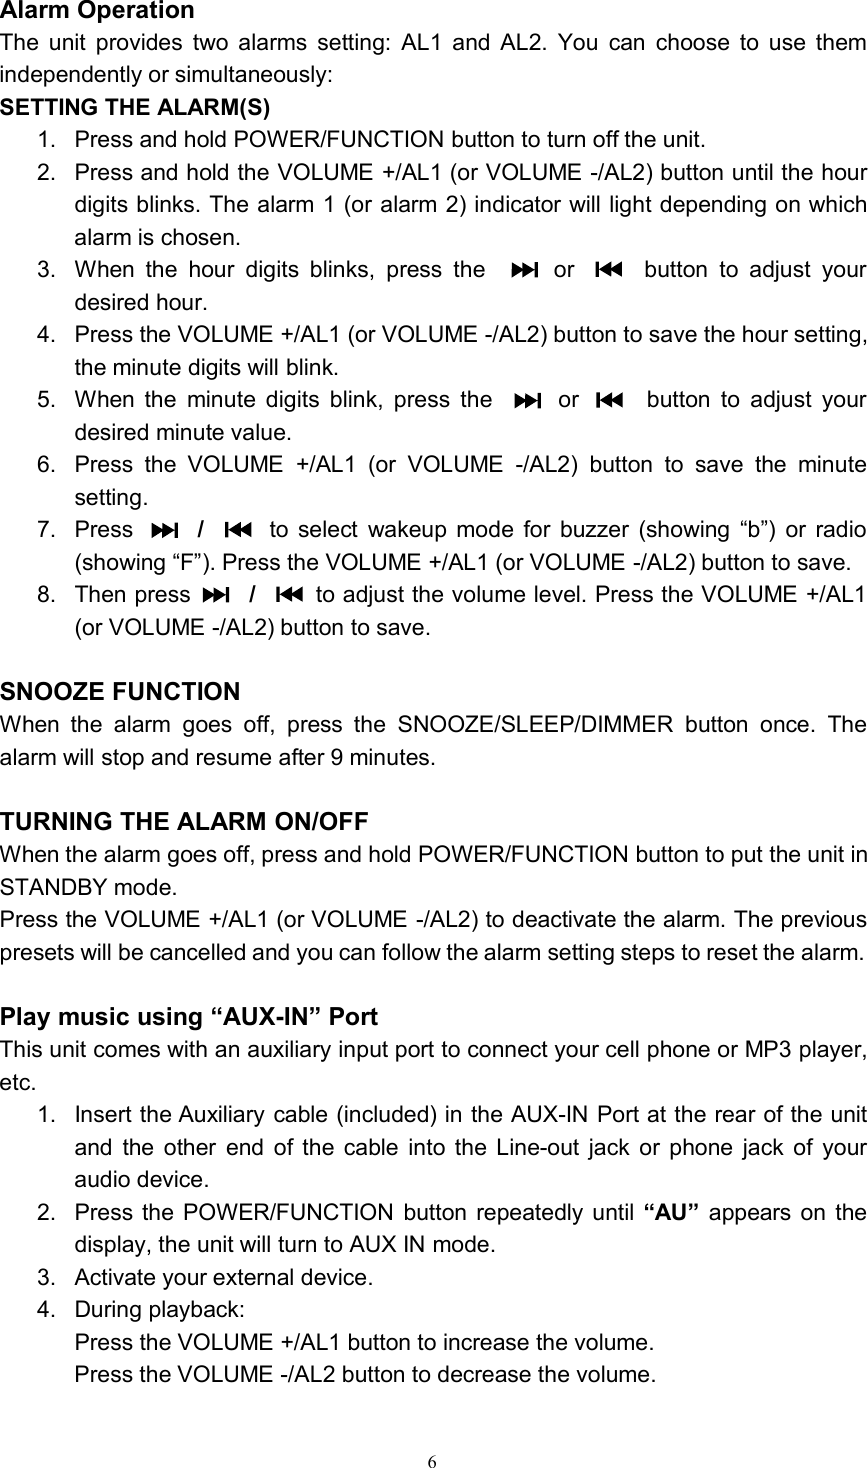 6Alarm OperationThe unit provides two alarms setting: AL1 and AL2. You can choose to use themindependently or simultaneously:SETTING THE ALARM(S)1. Press and hold POWER/FUNCTION button to turn off the unit.2. Press and hold the VOLUME +/AL1 (or VOLUME -/AL2) button until the hourdigits blinks. The alarm 1 (or alarm 2) indicator will light depending on whichalarm is chosen.3. When the hour digits blinks, press the or button to adjust yourdesired hour.4. Press the VOLUME +/AL1 (or VOLUME -/AL2) button to save the hour setting,the minute digits will blink.5. When the minute digits blink, press the or button to adjust yourdesired minute value.6. Press the VOLUME +/AL1 (or VOLUME -/AL2) button to save the minutesetting.7. Press /to select wakeup mode for buzzer (showing “b”) or radio(showing “F”). Press the VOLUME +/AL1 (or VOLUME -/AL2) button to save.8. Then press /to adjust the volume level. Press the VOLUME +/AL1(or VOLUME -/AL2) button to save.SNOOZE FUNCTIONWhen the alarm goes off, press the SNOOZE/SLEEP/DIMMER button once. Thealarm will stop and resume after 9 minutes.TURNING THE ALARM ON/OFFWhen the alarm goes off, press and hold POWER/FUNCTION button to put the unit inSTANDBY mode.Press the VOLUME +/AL1 (or VOLUME -/AL2) to deactivate the alarm. The previouspresets will be cancelled and you can follow the alarm setting steps to reset the alarm.Play music using “AUX-IN” PortThis unit comes with an auxiliary input port to connect your cell phone or MP3 player,etc.1. Insert the Auxiliary cable (included) in the AUX-IN Port at the rear of the unitand the other end of the cable into the Line-out jack or phone jack of youraudio device.2. Press the POWER/FUNCTION button repeatedly until “AU” appears on thedisplay, the unit will turn to AUX IN mode.3. Activate your external device.4. During playback:Press the VOLUME +/AL1 button to increase the volume.Press the VOLUME -/AL2 button to decrease the volume.    